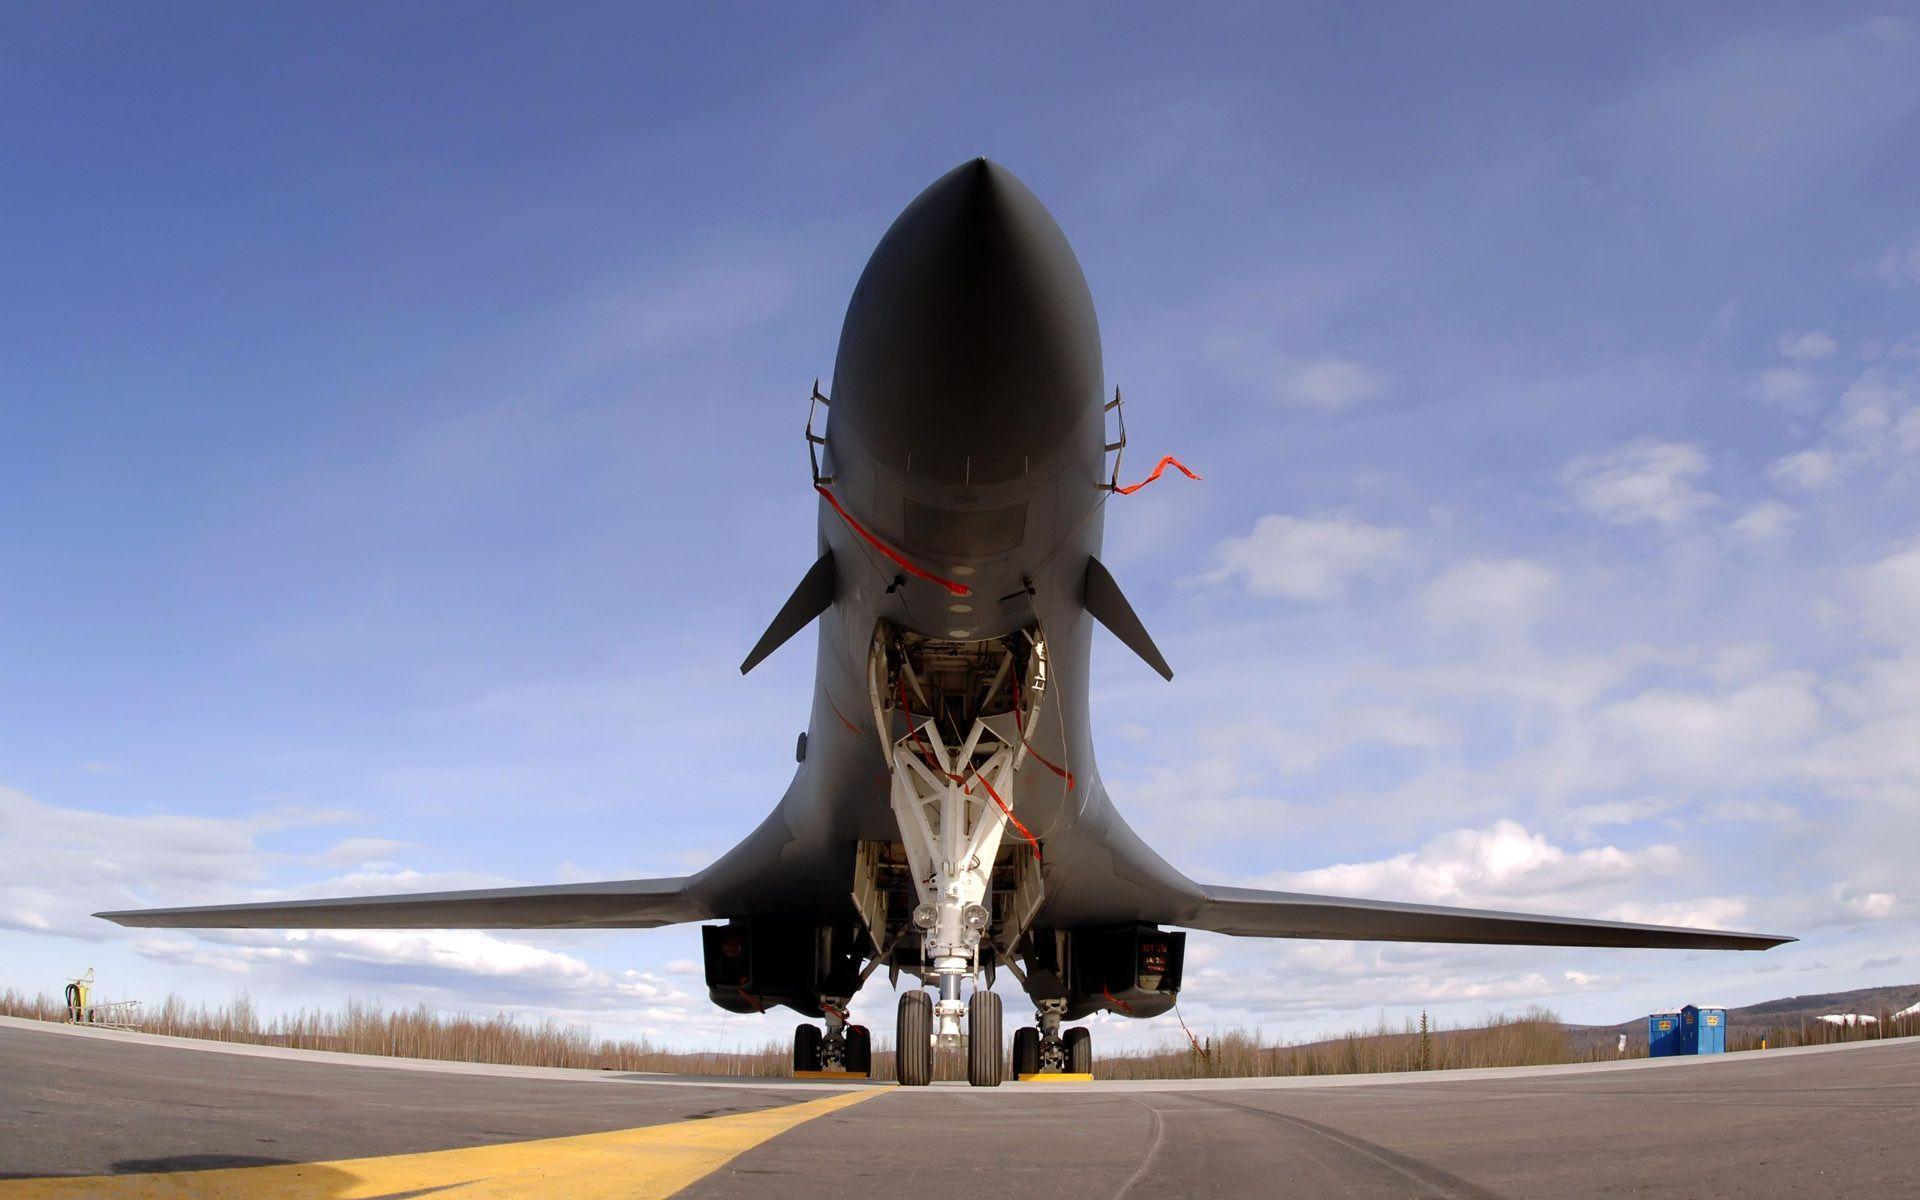 Fighter on a runway wallpaper and image, picture